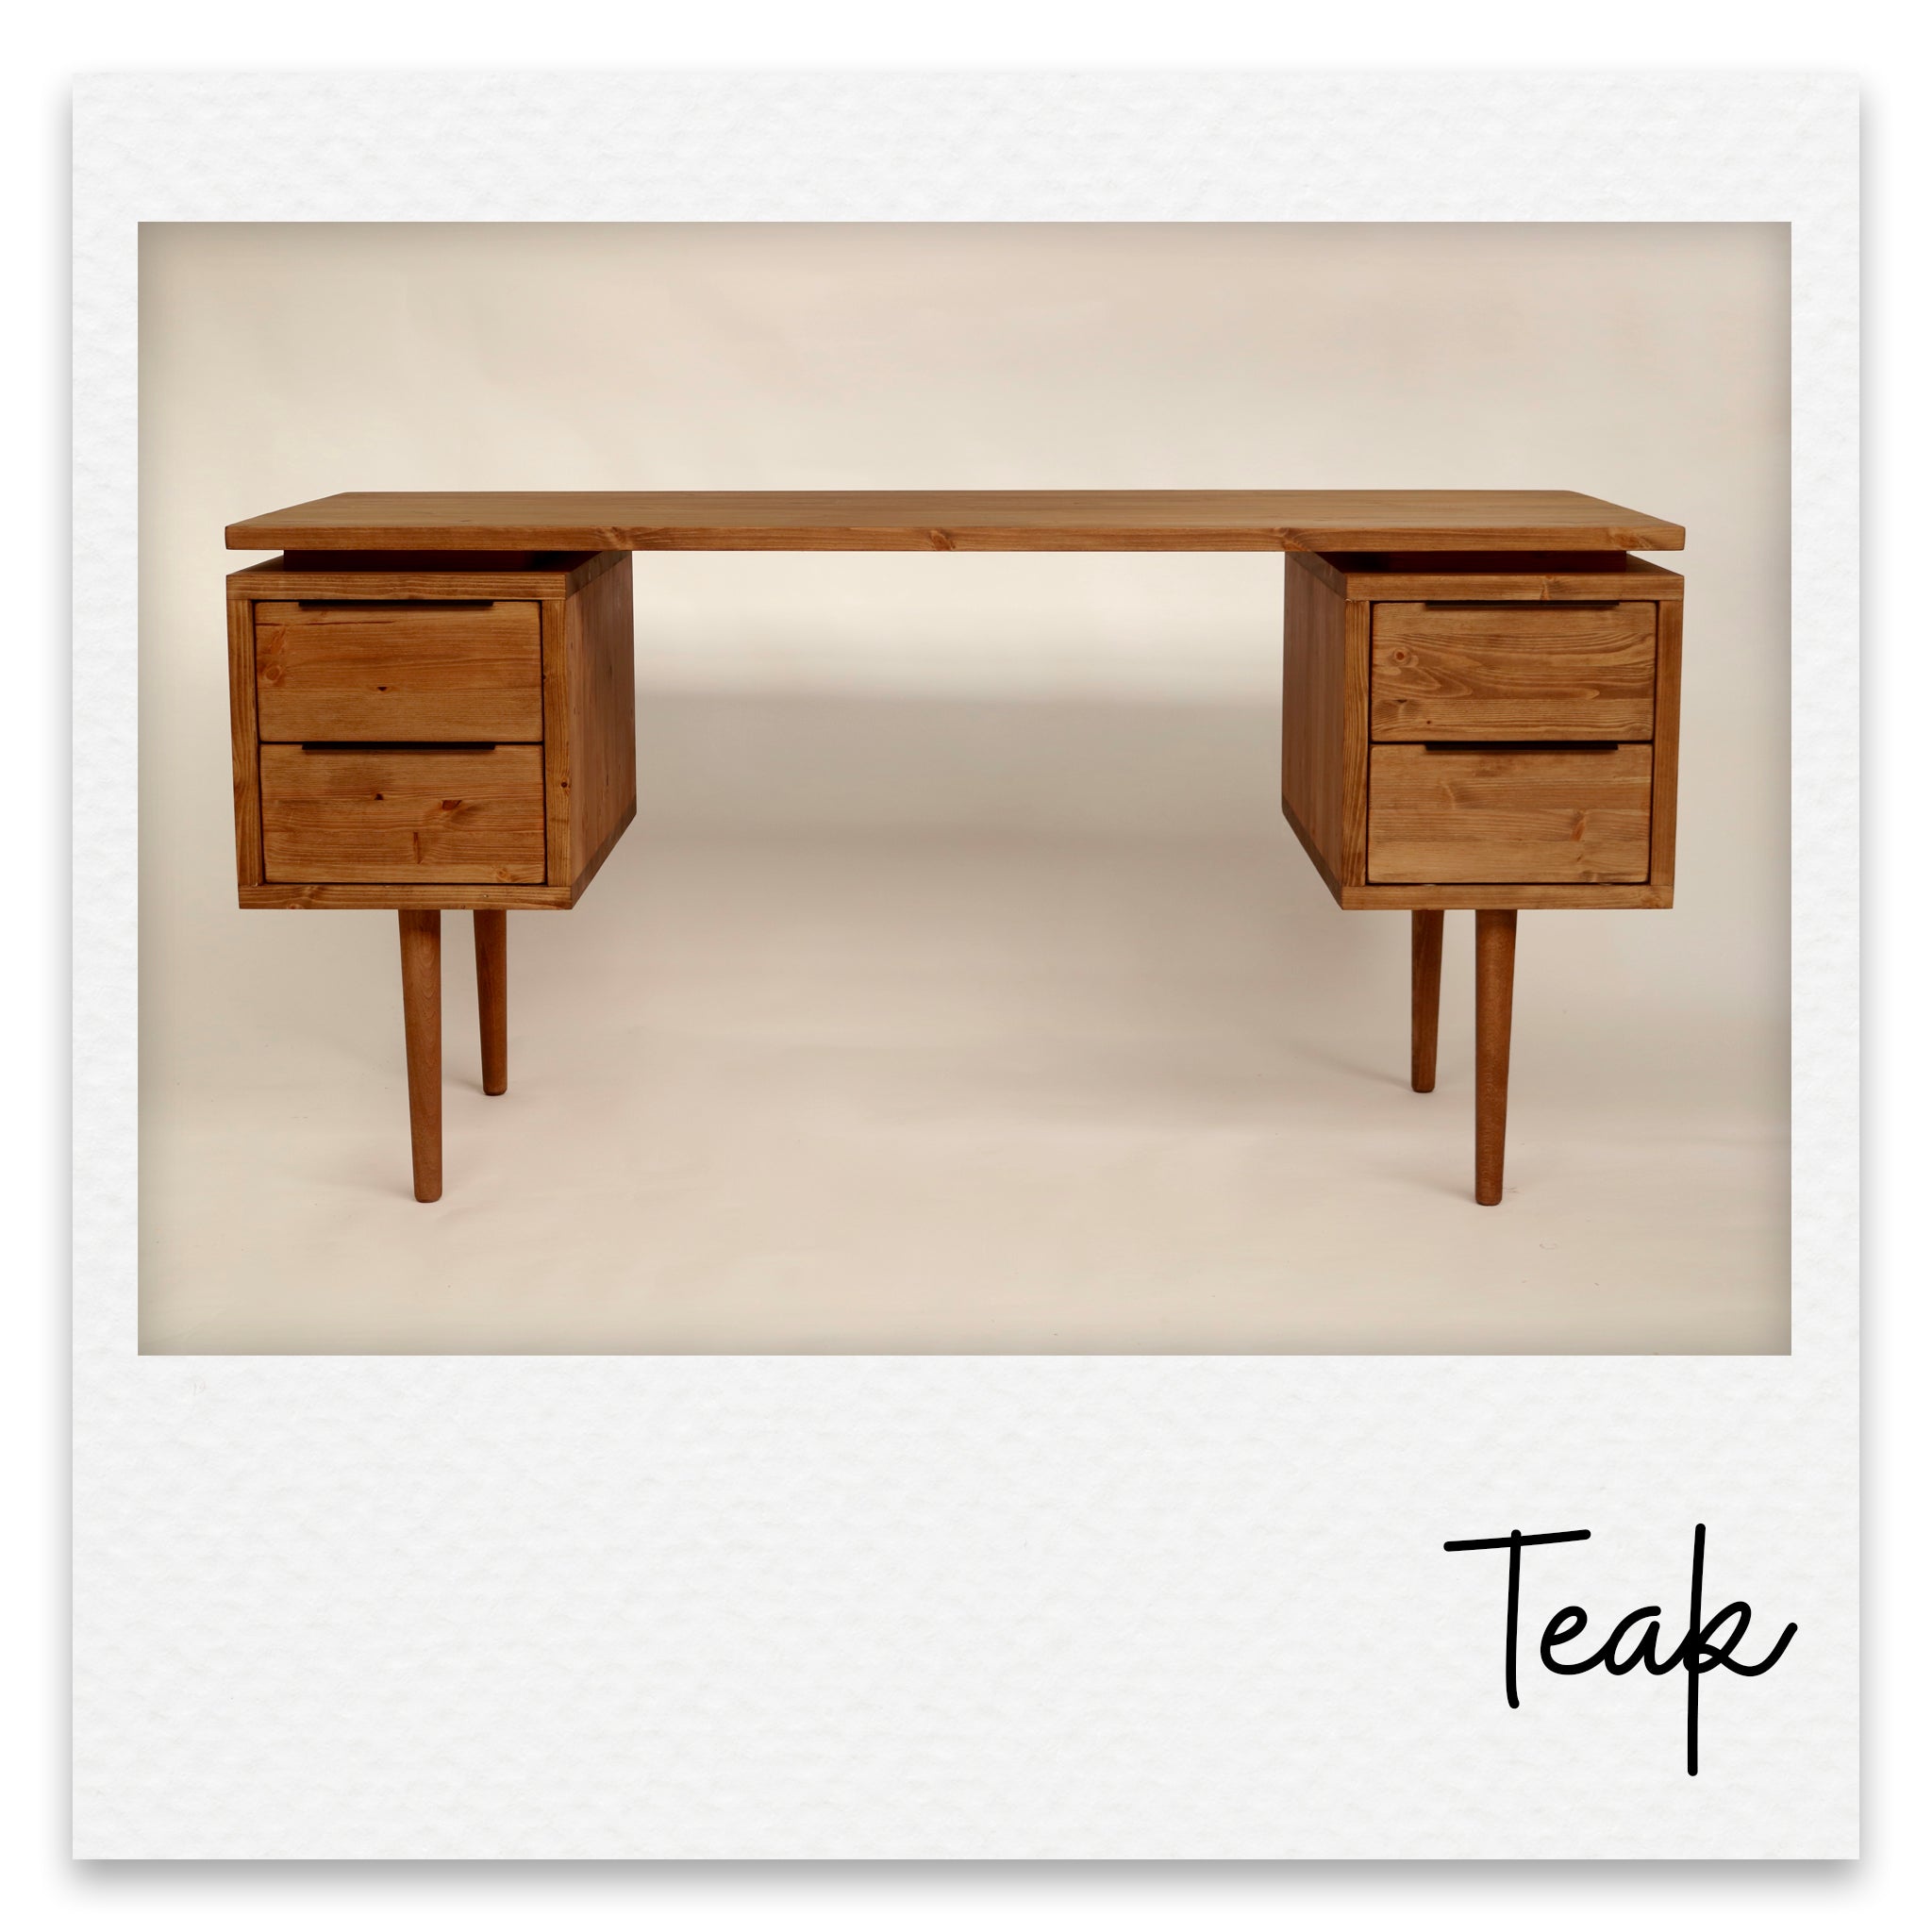 Large Executive Wooden Desk with Double Pedestal Drawers - Maeve